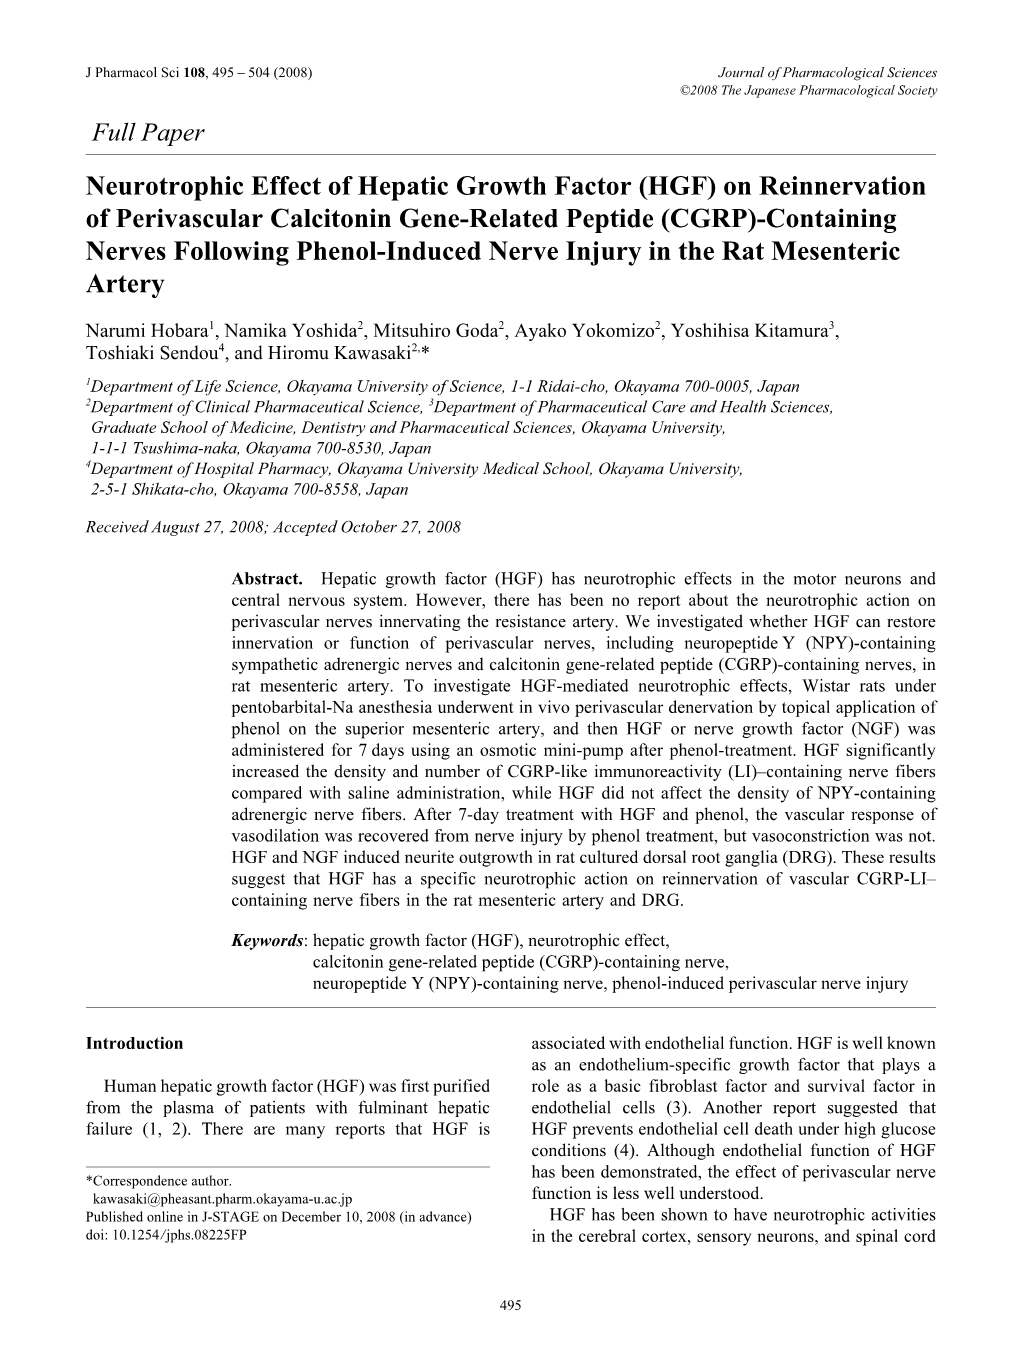 HGF) on Reinnervation of Perivascular Calcitonin Gene-Related Peptide (CGRP)-Containing Nerves Following Phenol-Induced Nerve Injury in the Rat Mesenteric Artery